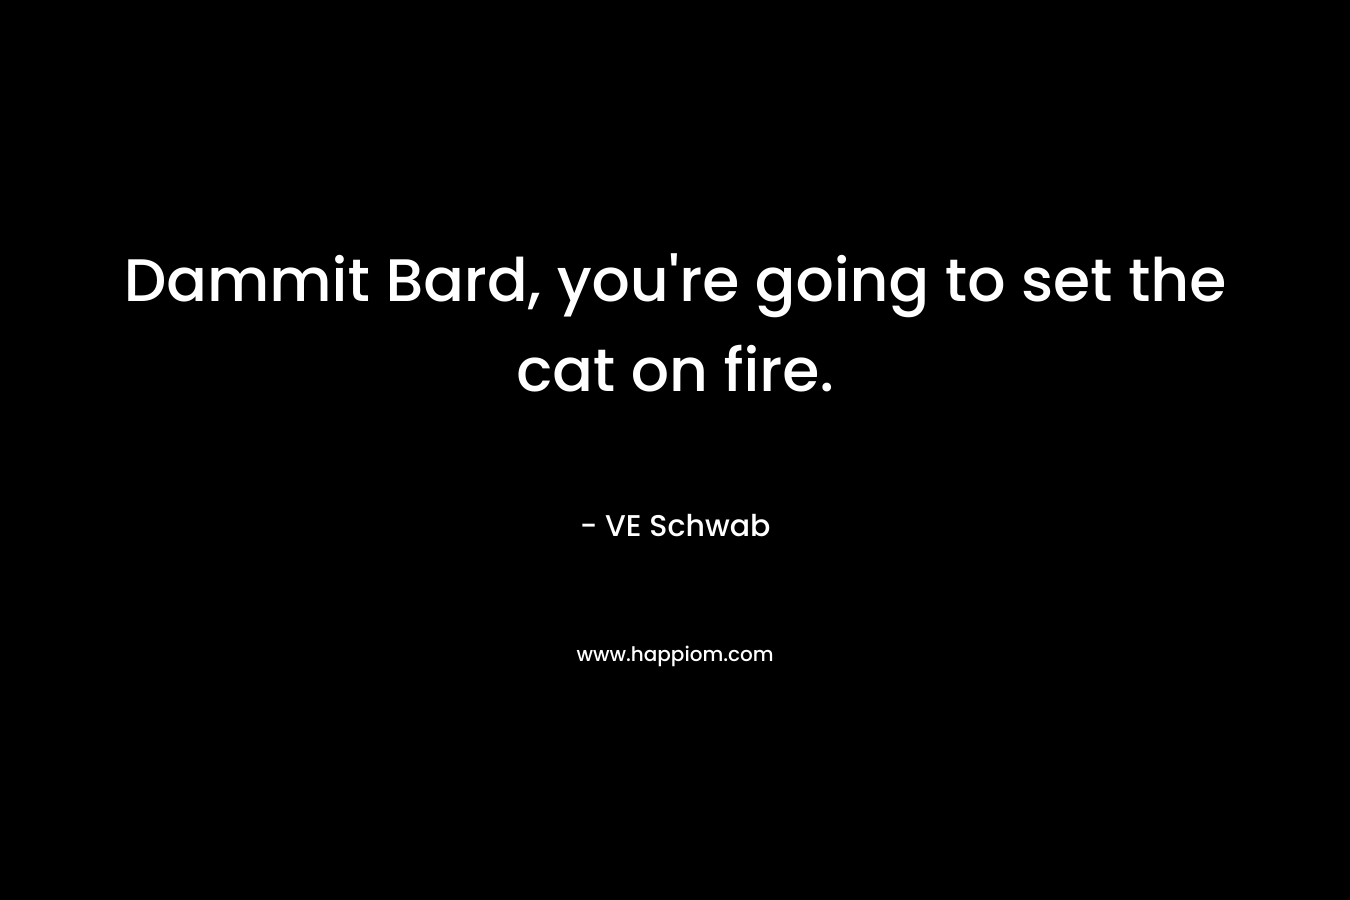 Dammit Bard, you’re going to set the cat on fire. – VE Schwab